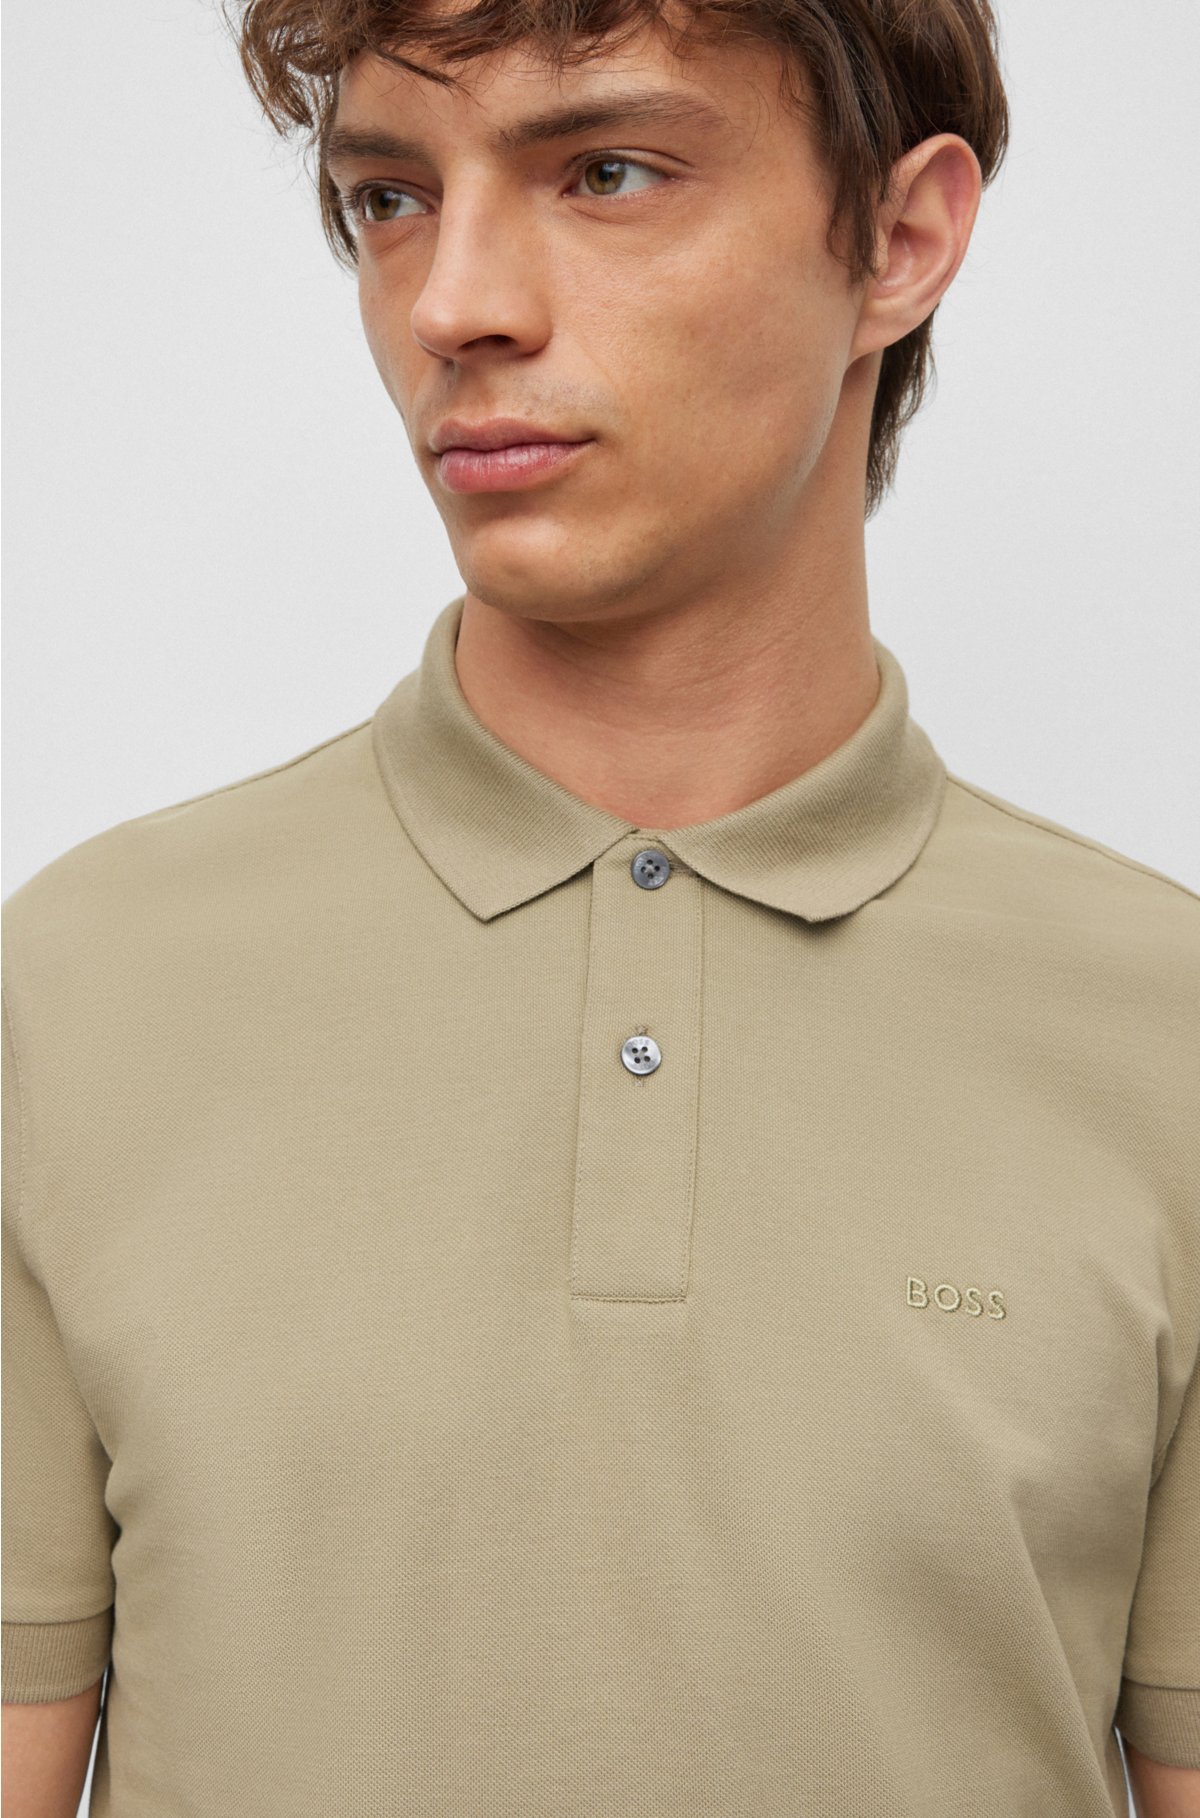 BOSS embroidered shirt - Cotton logo with polo